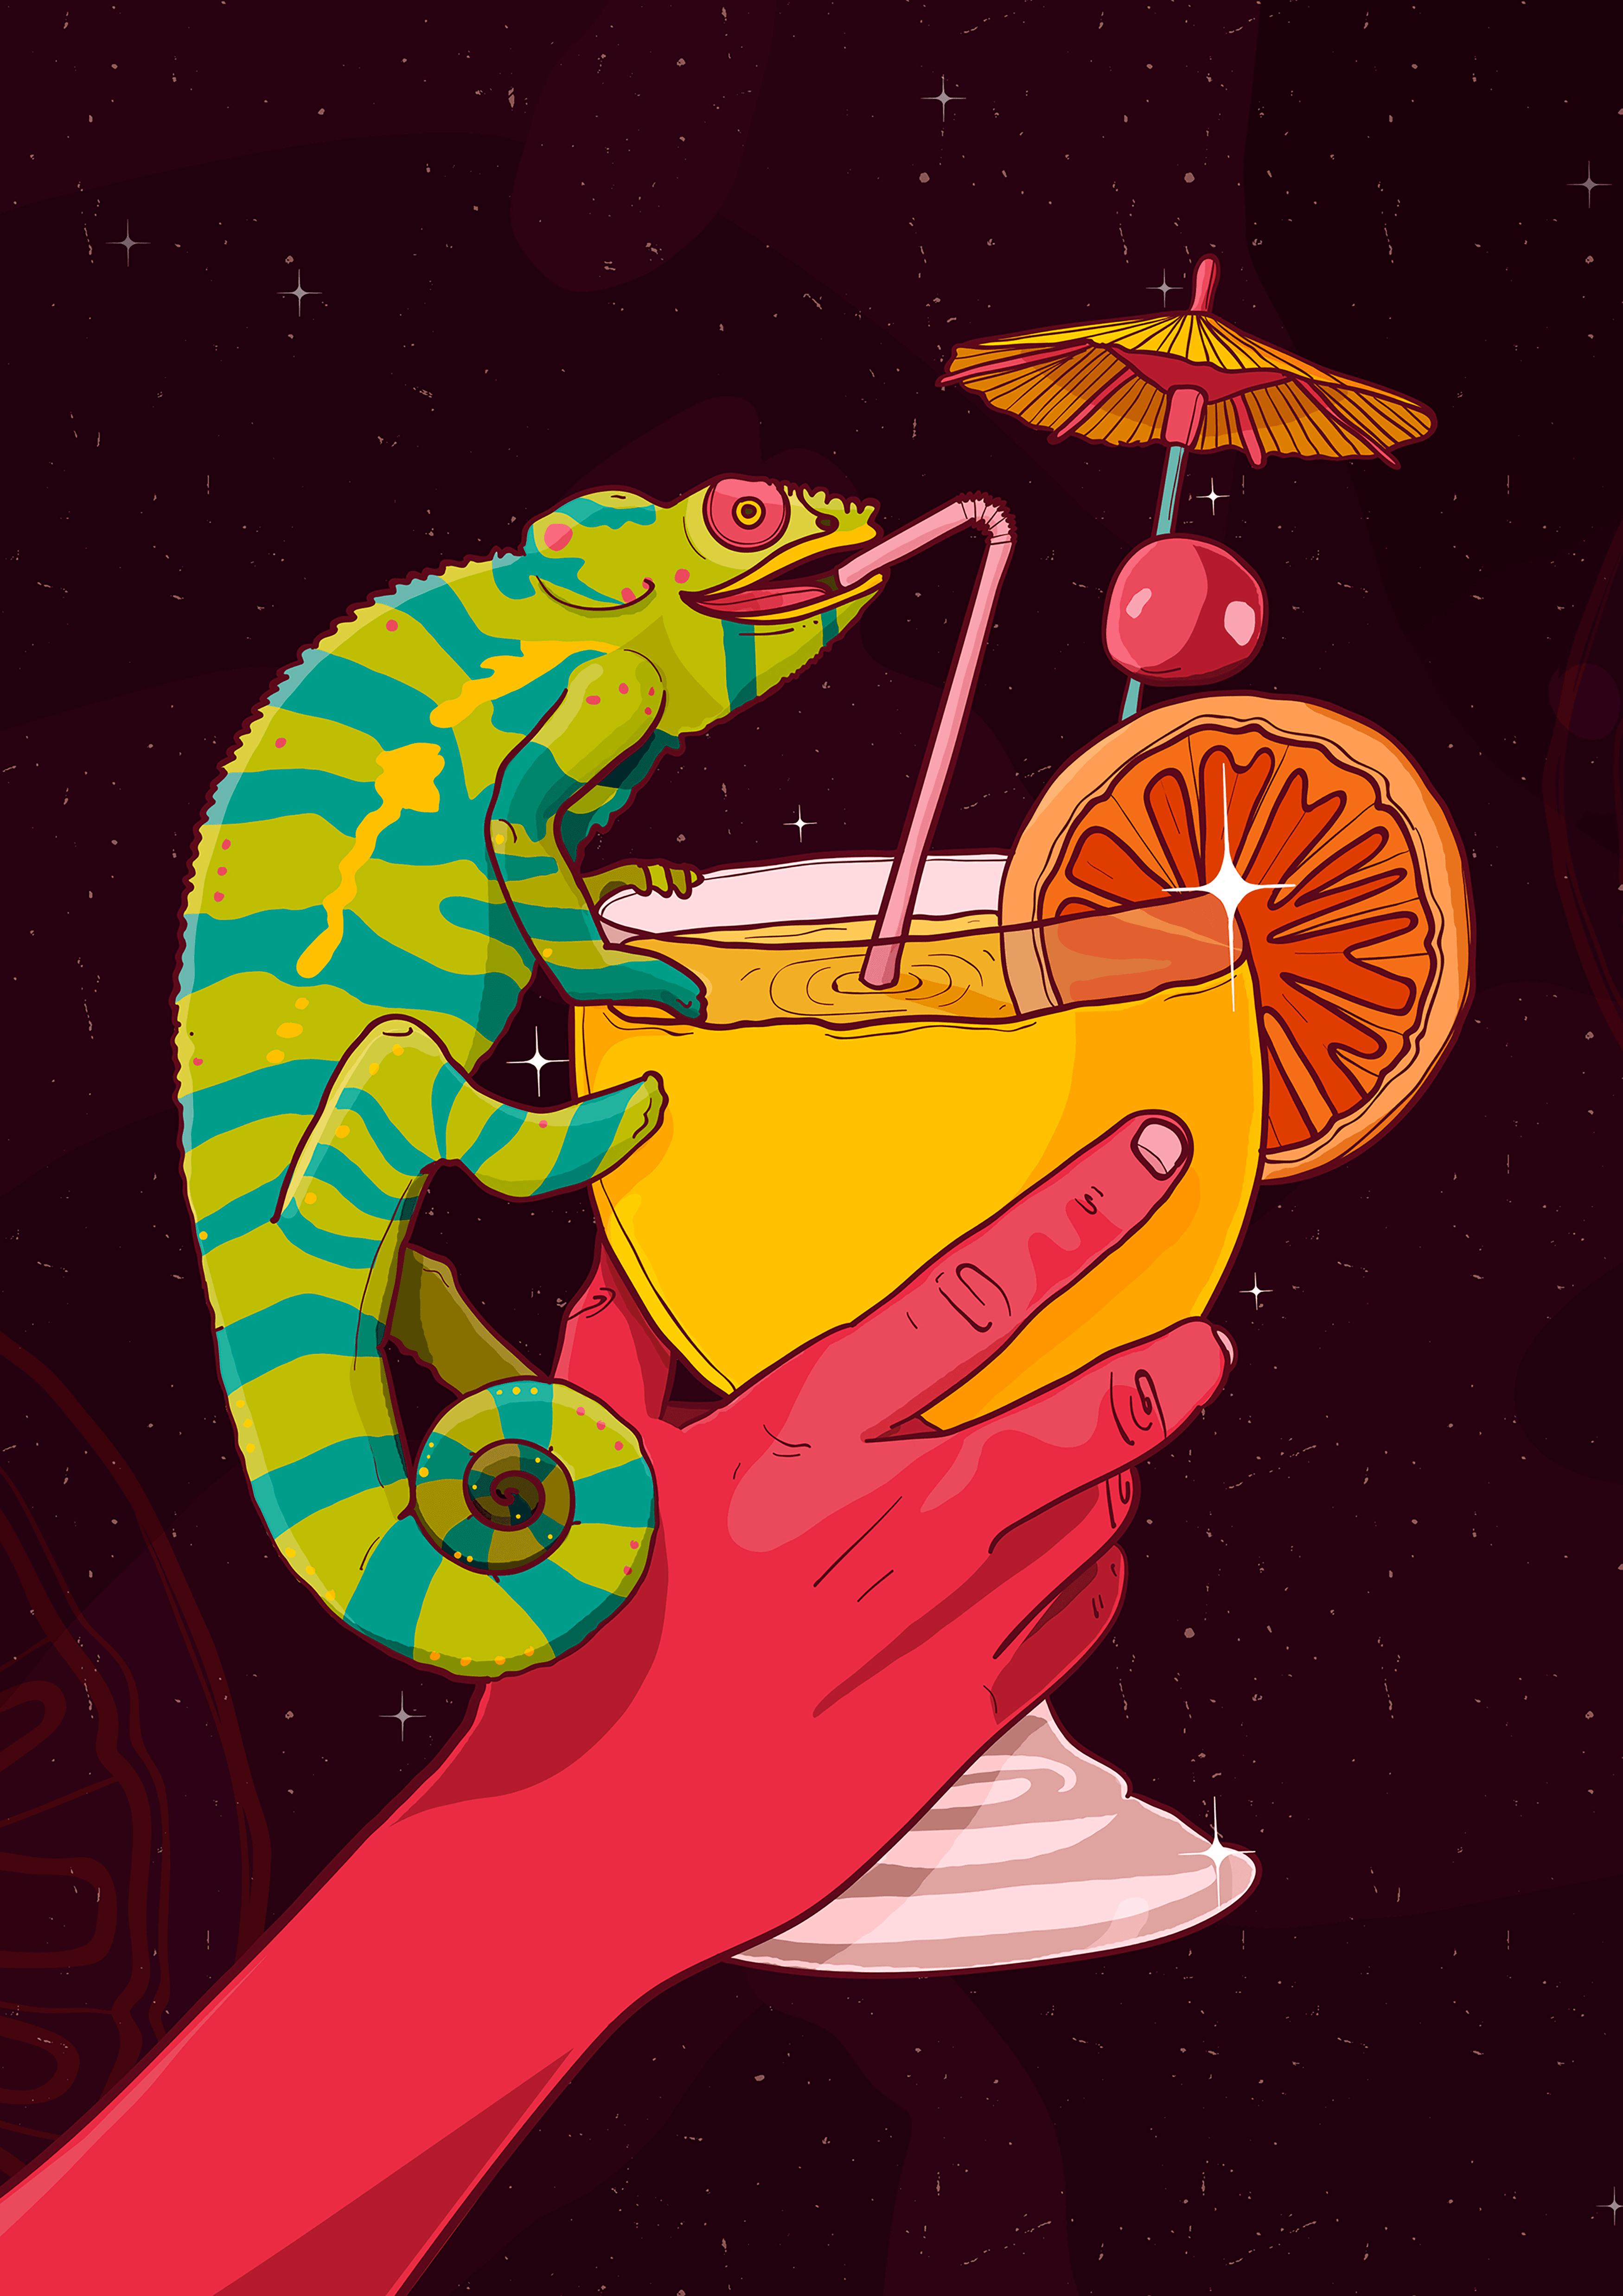 The cosmic hand and the chameleon